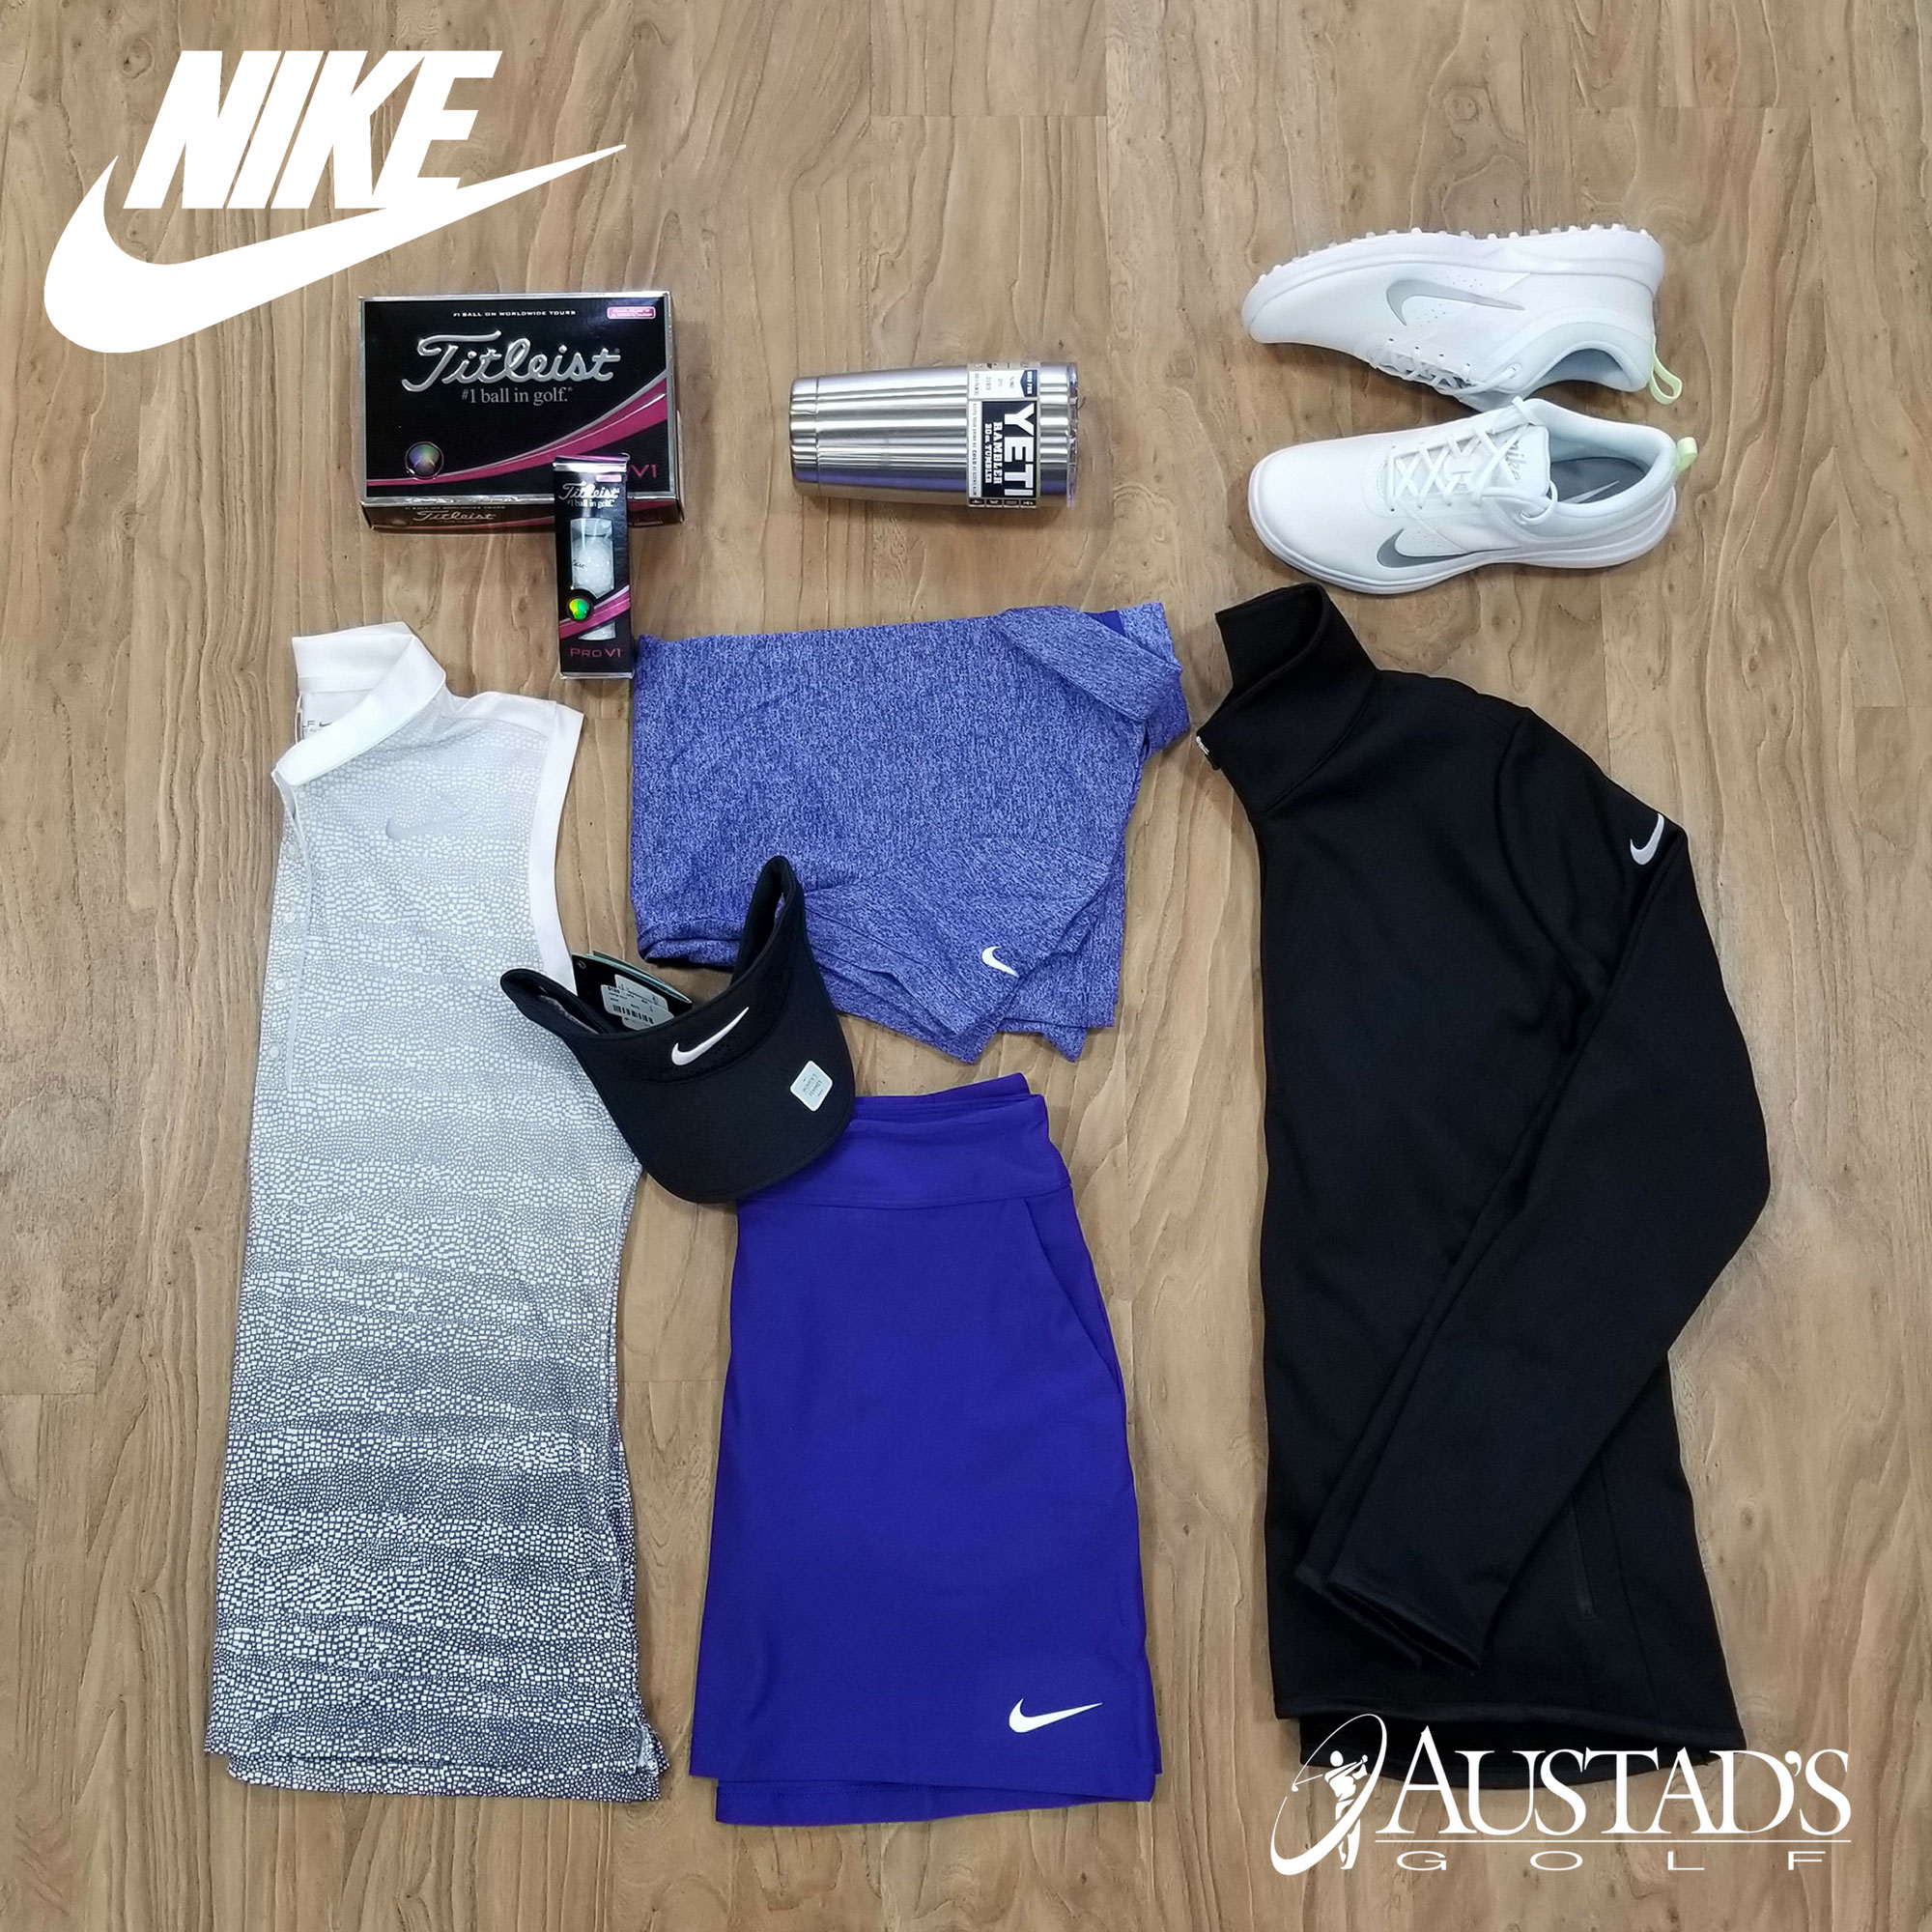 Nike Women's Golf Collection 2